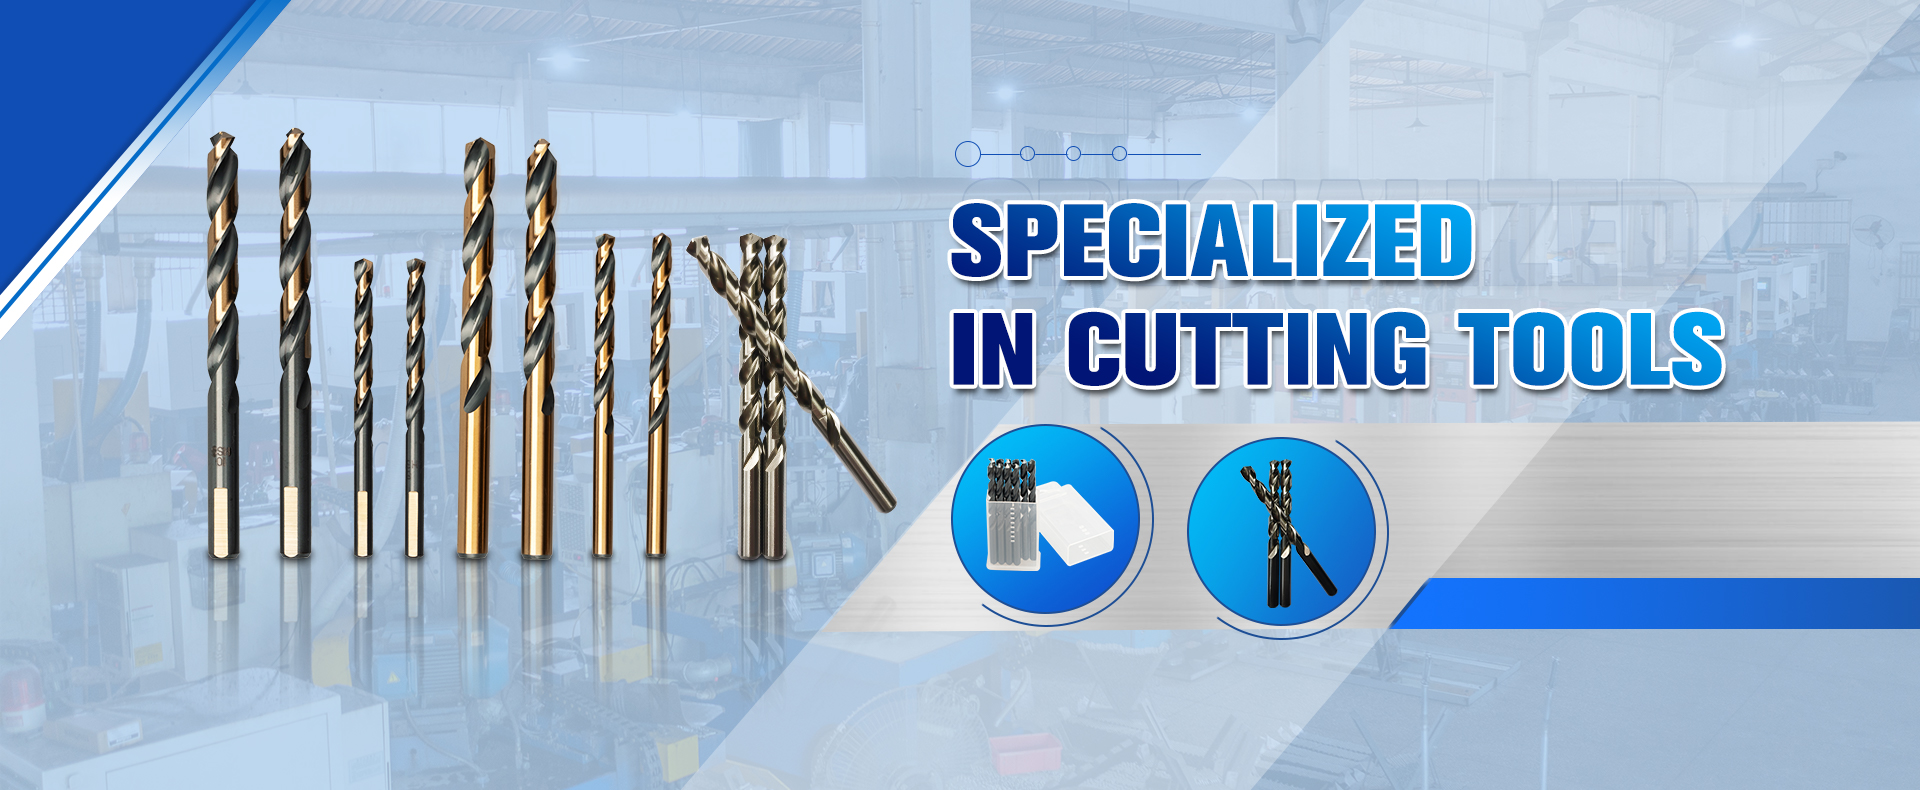 Specialized in cutting tools